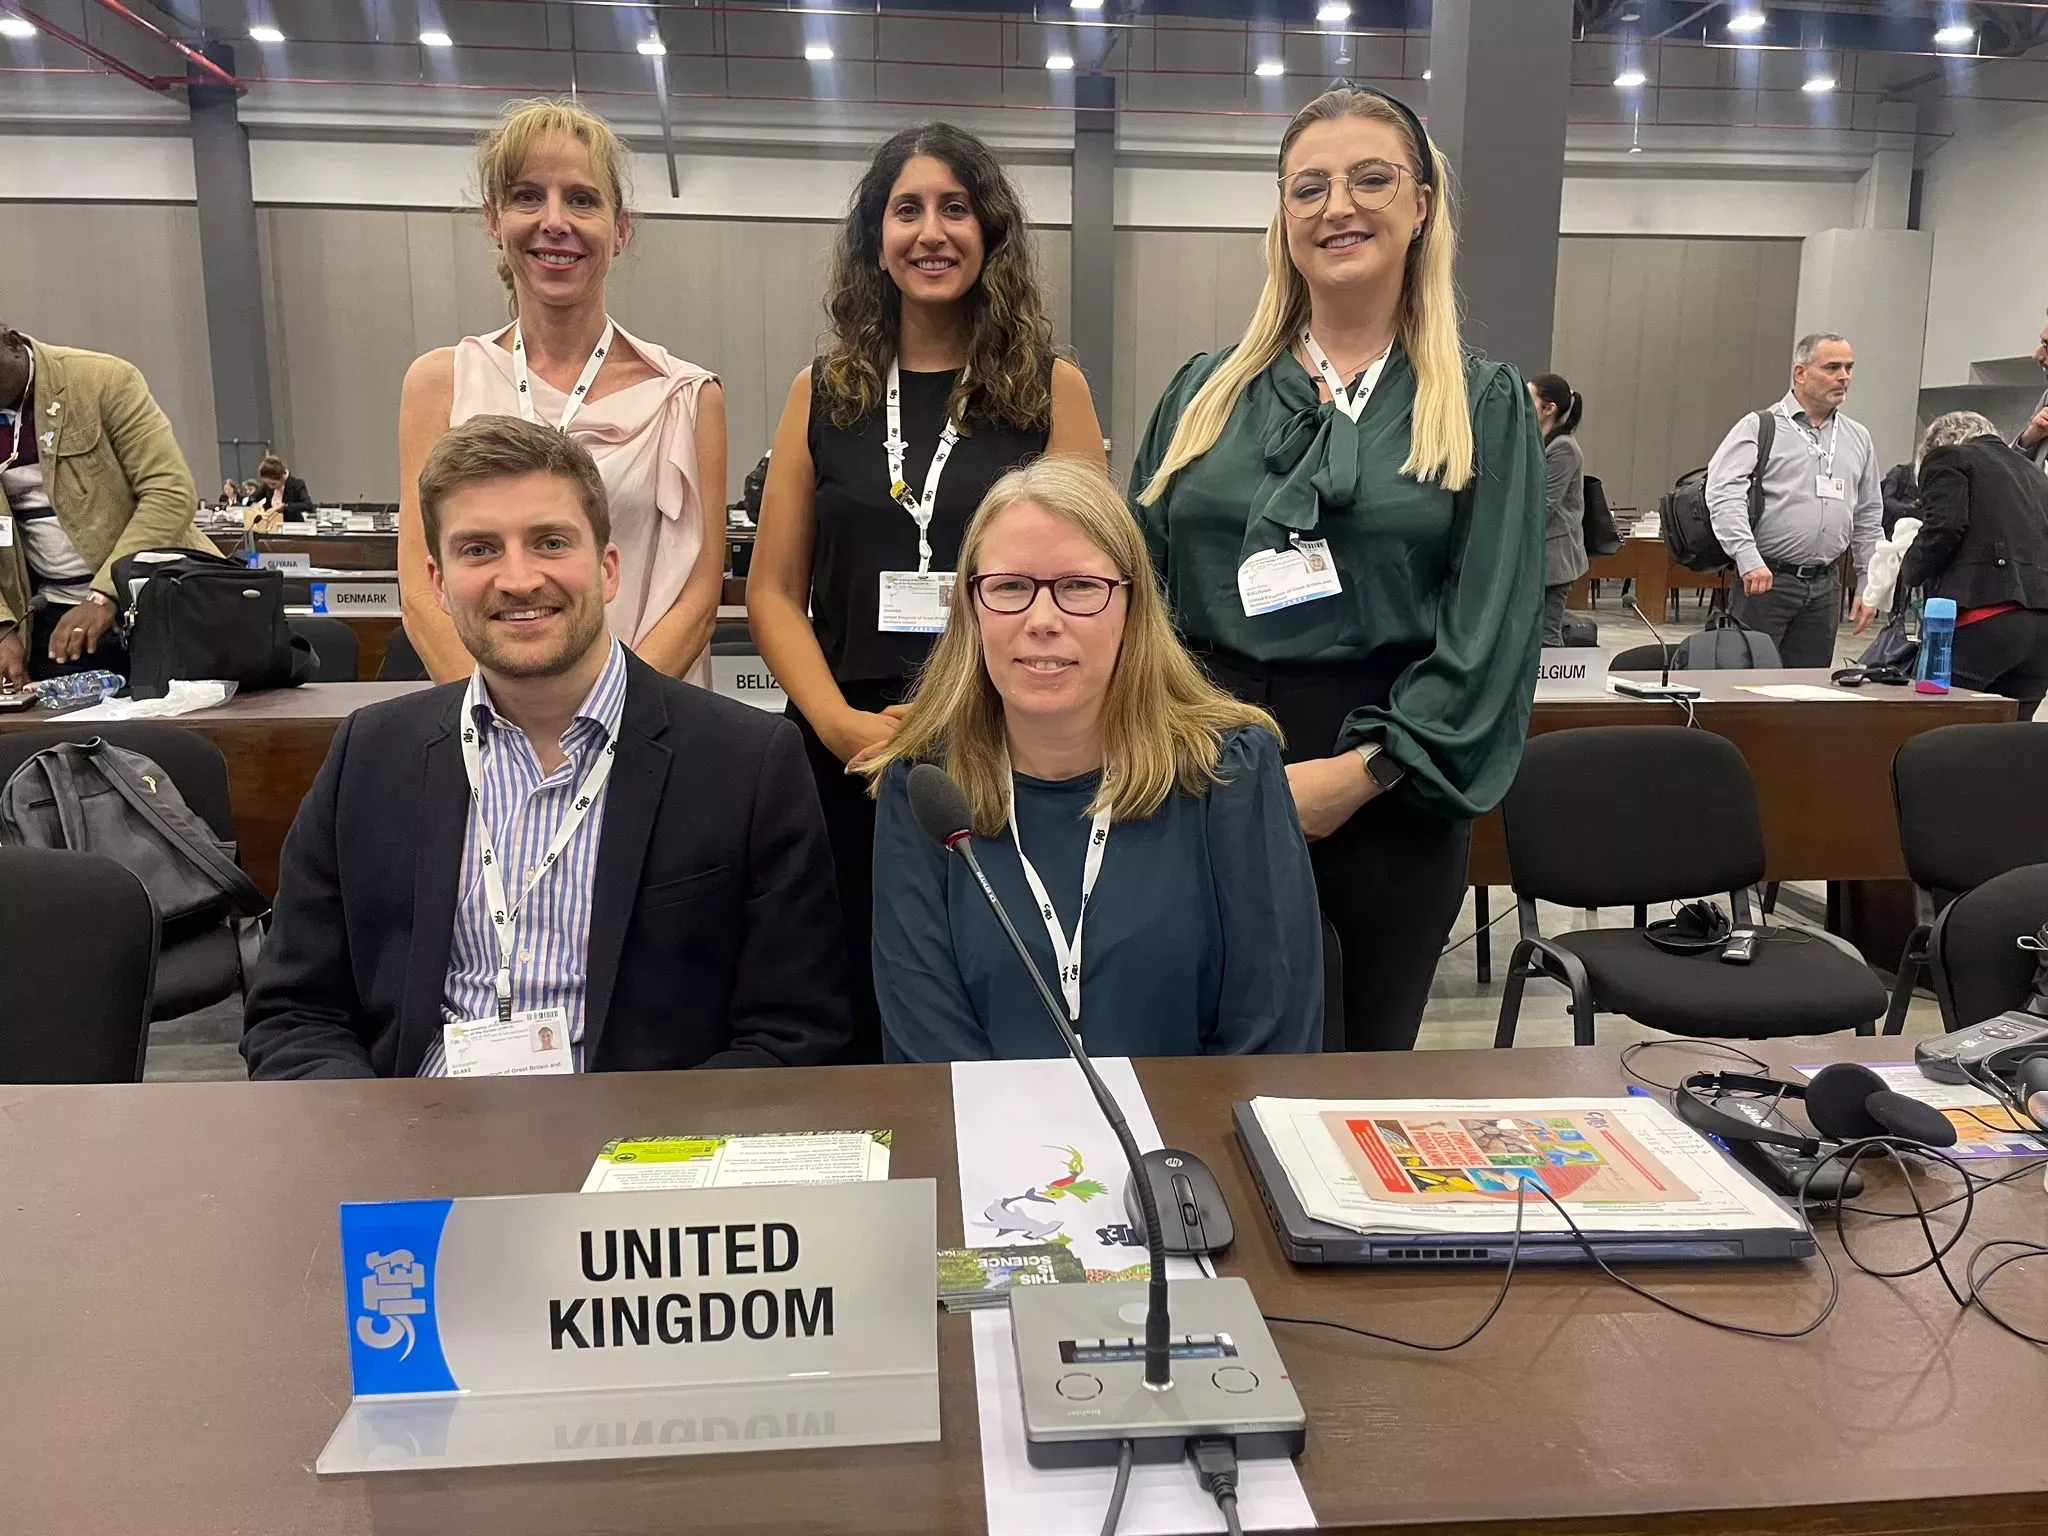 Kew researchers and colleagues pose for a photo at a desk. On the desk are CITES documents, a microphone and a plaque marked United Kingdom